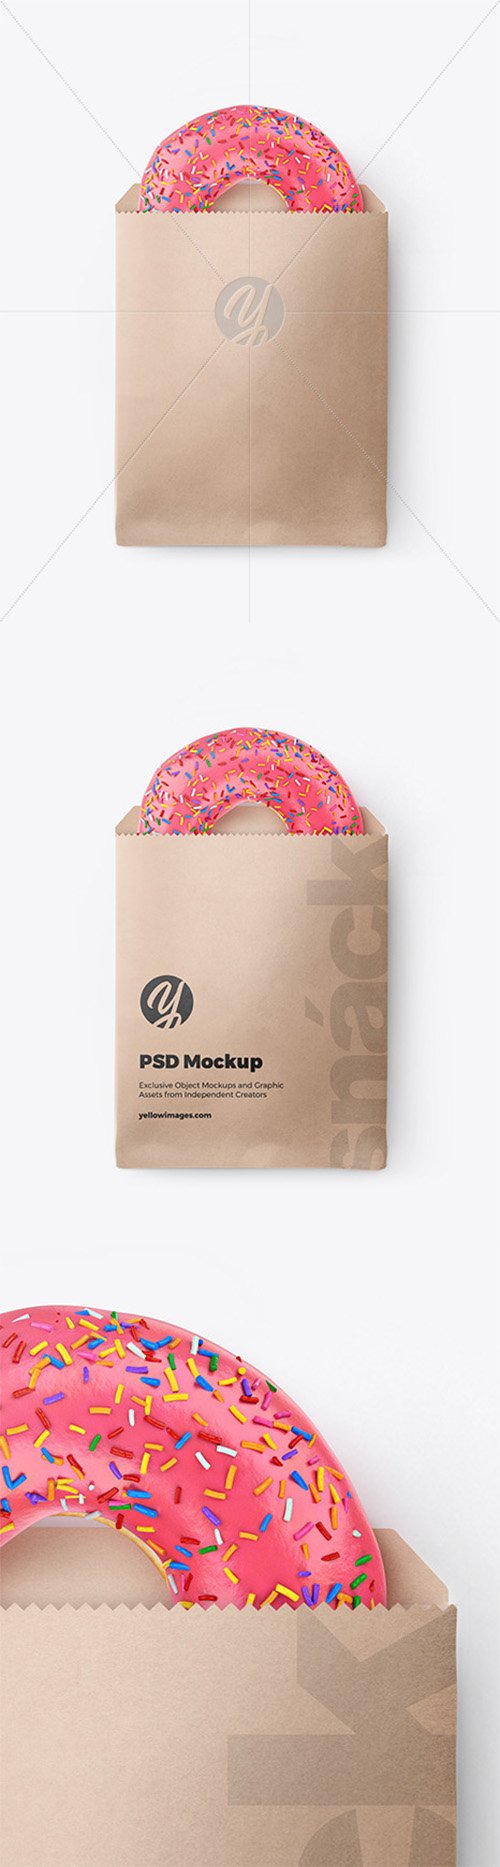 Paper Pack with Pink Glazed Donut 65191 TIF